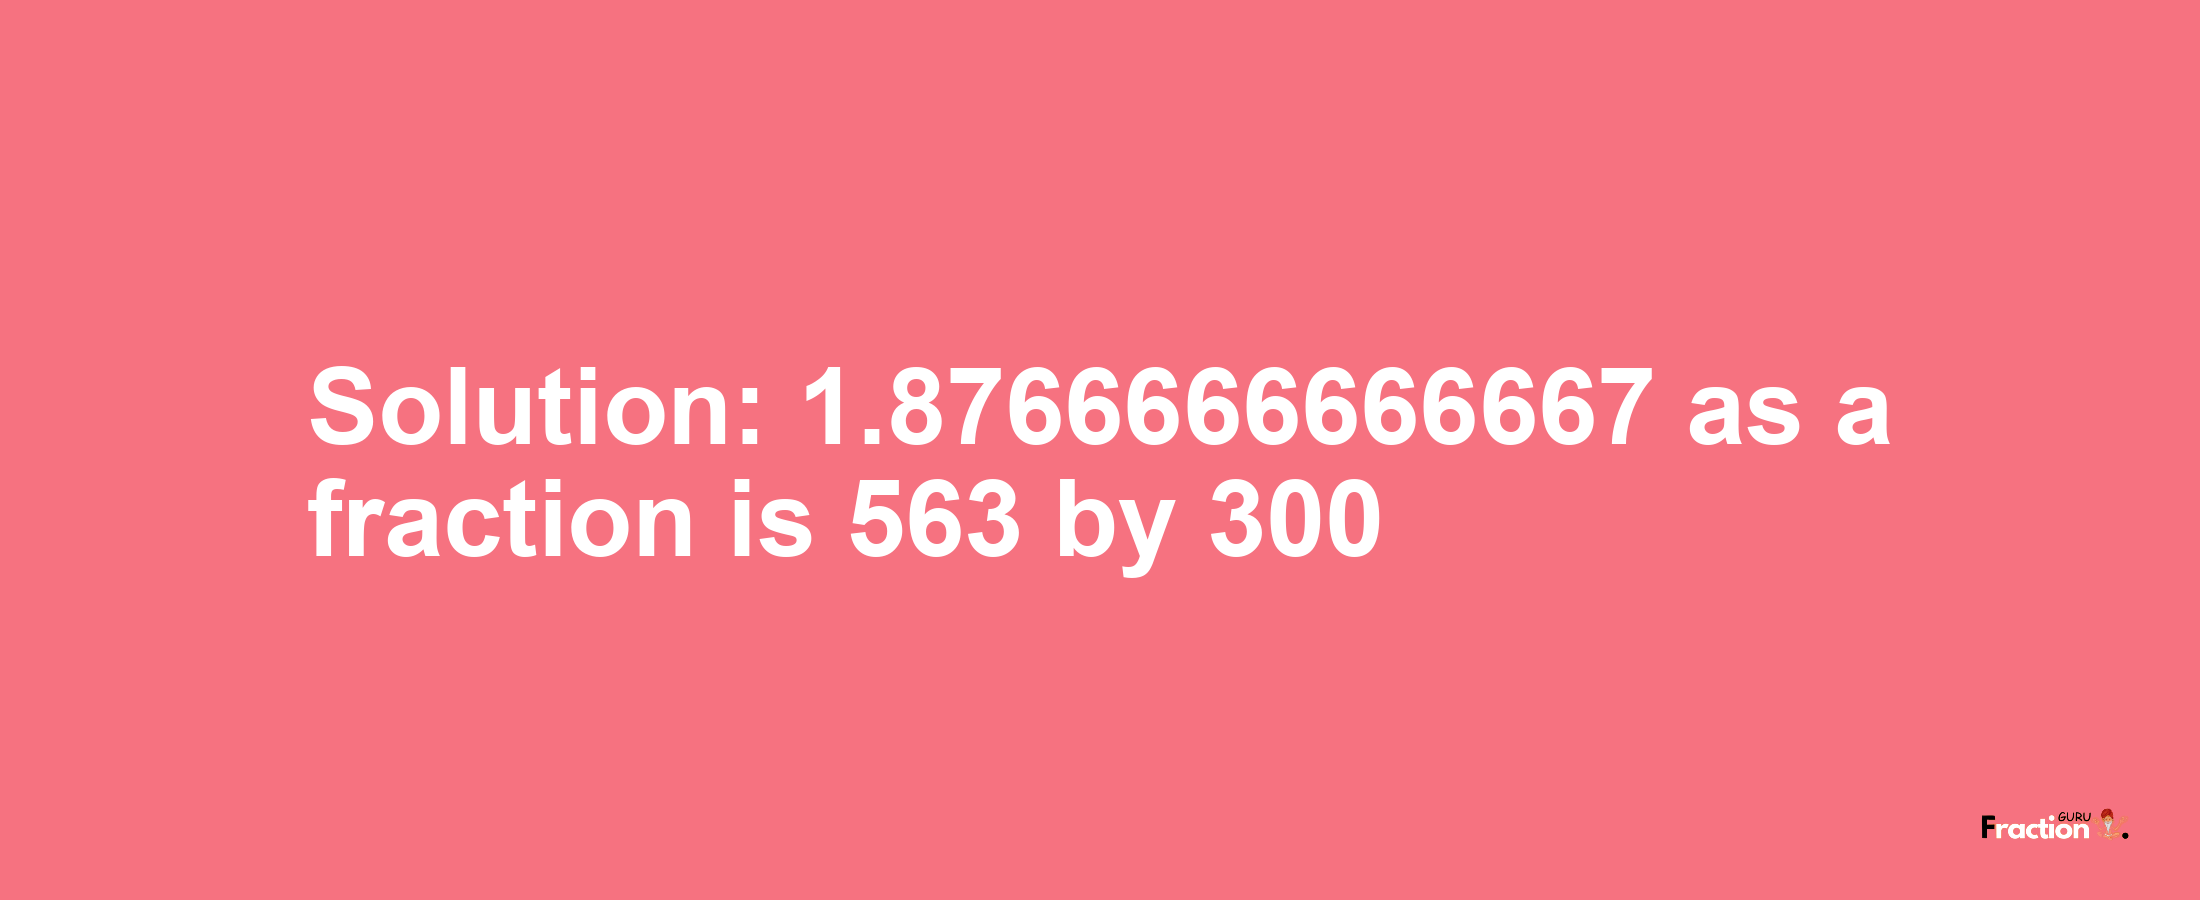 Solution:1.8766666666667 as a fraction is 563/300